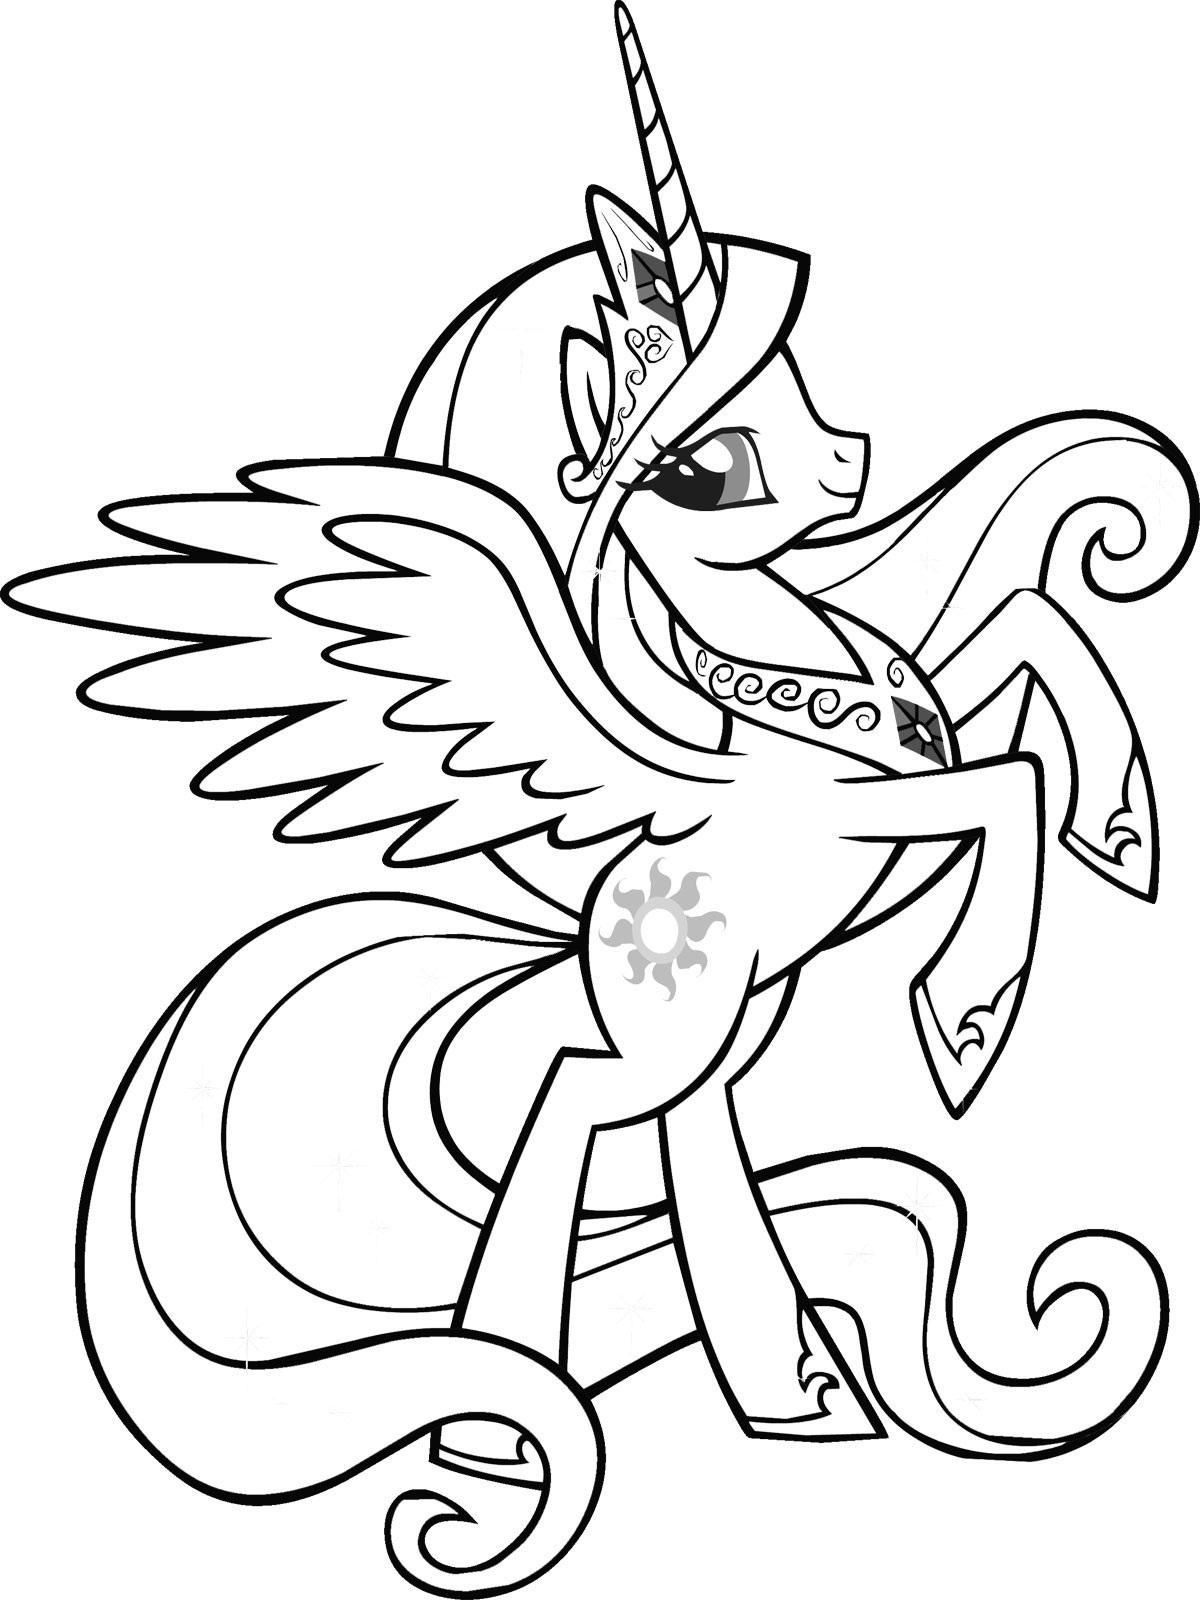 Coloring Pages For Girls Unicorn
 Unicorn Coloring Pages For M Pinterest